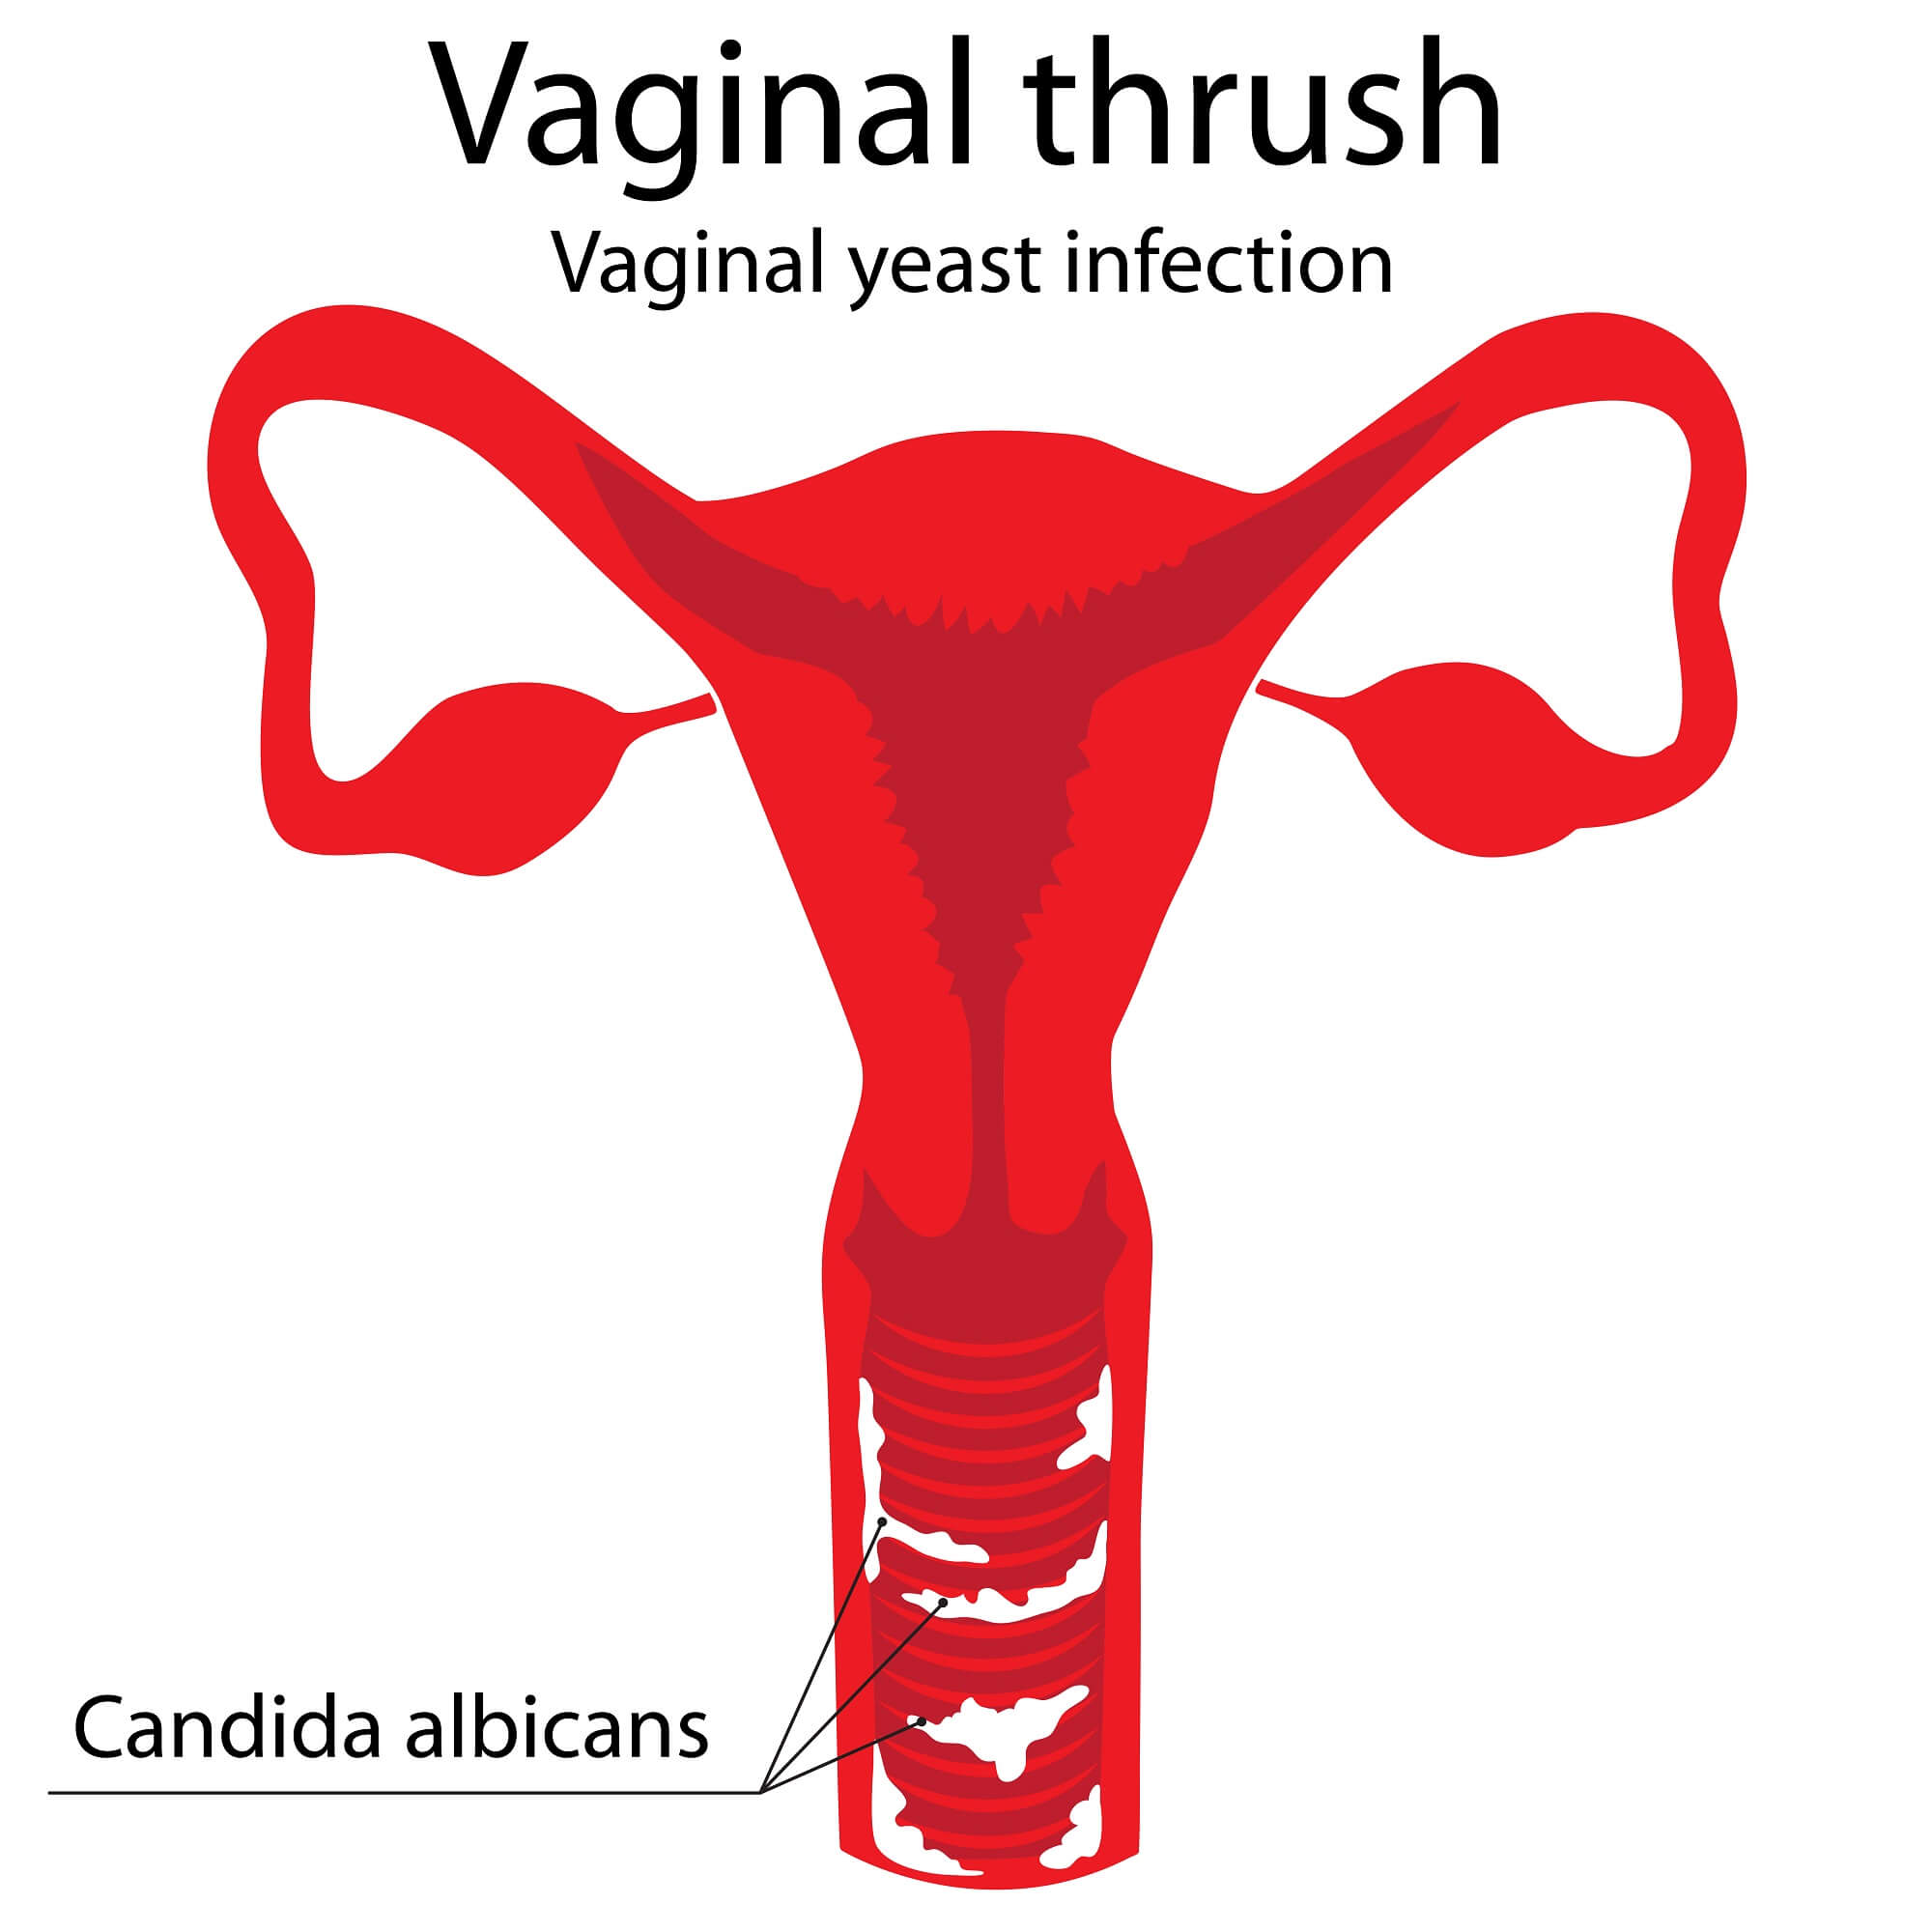 Vagainal yeast infection (thrush) diagram with uterus and vaginal canal infected with Candida.